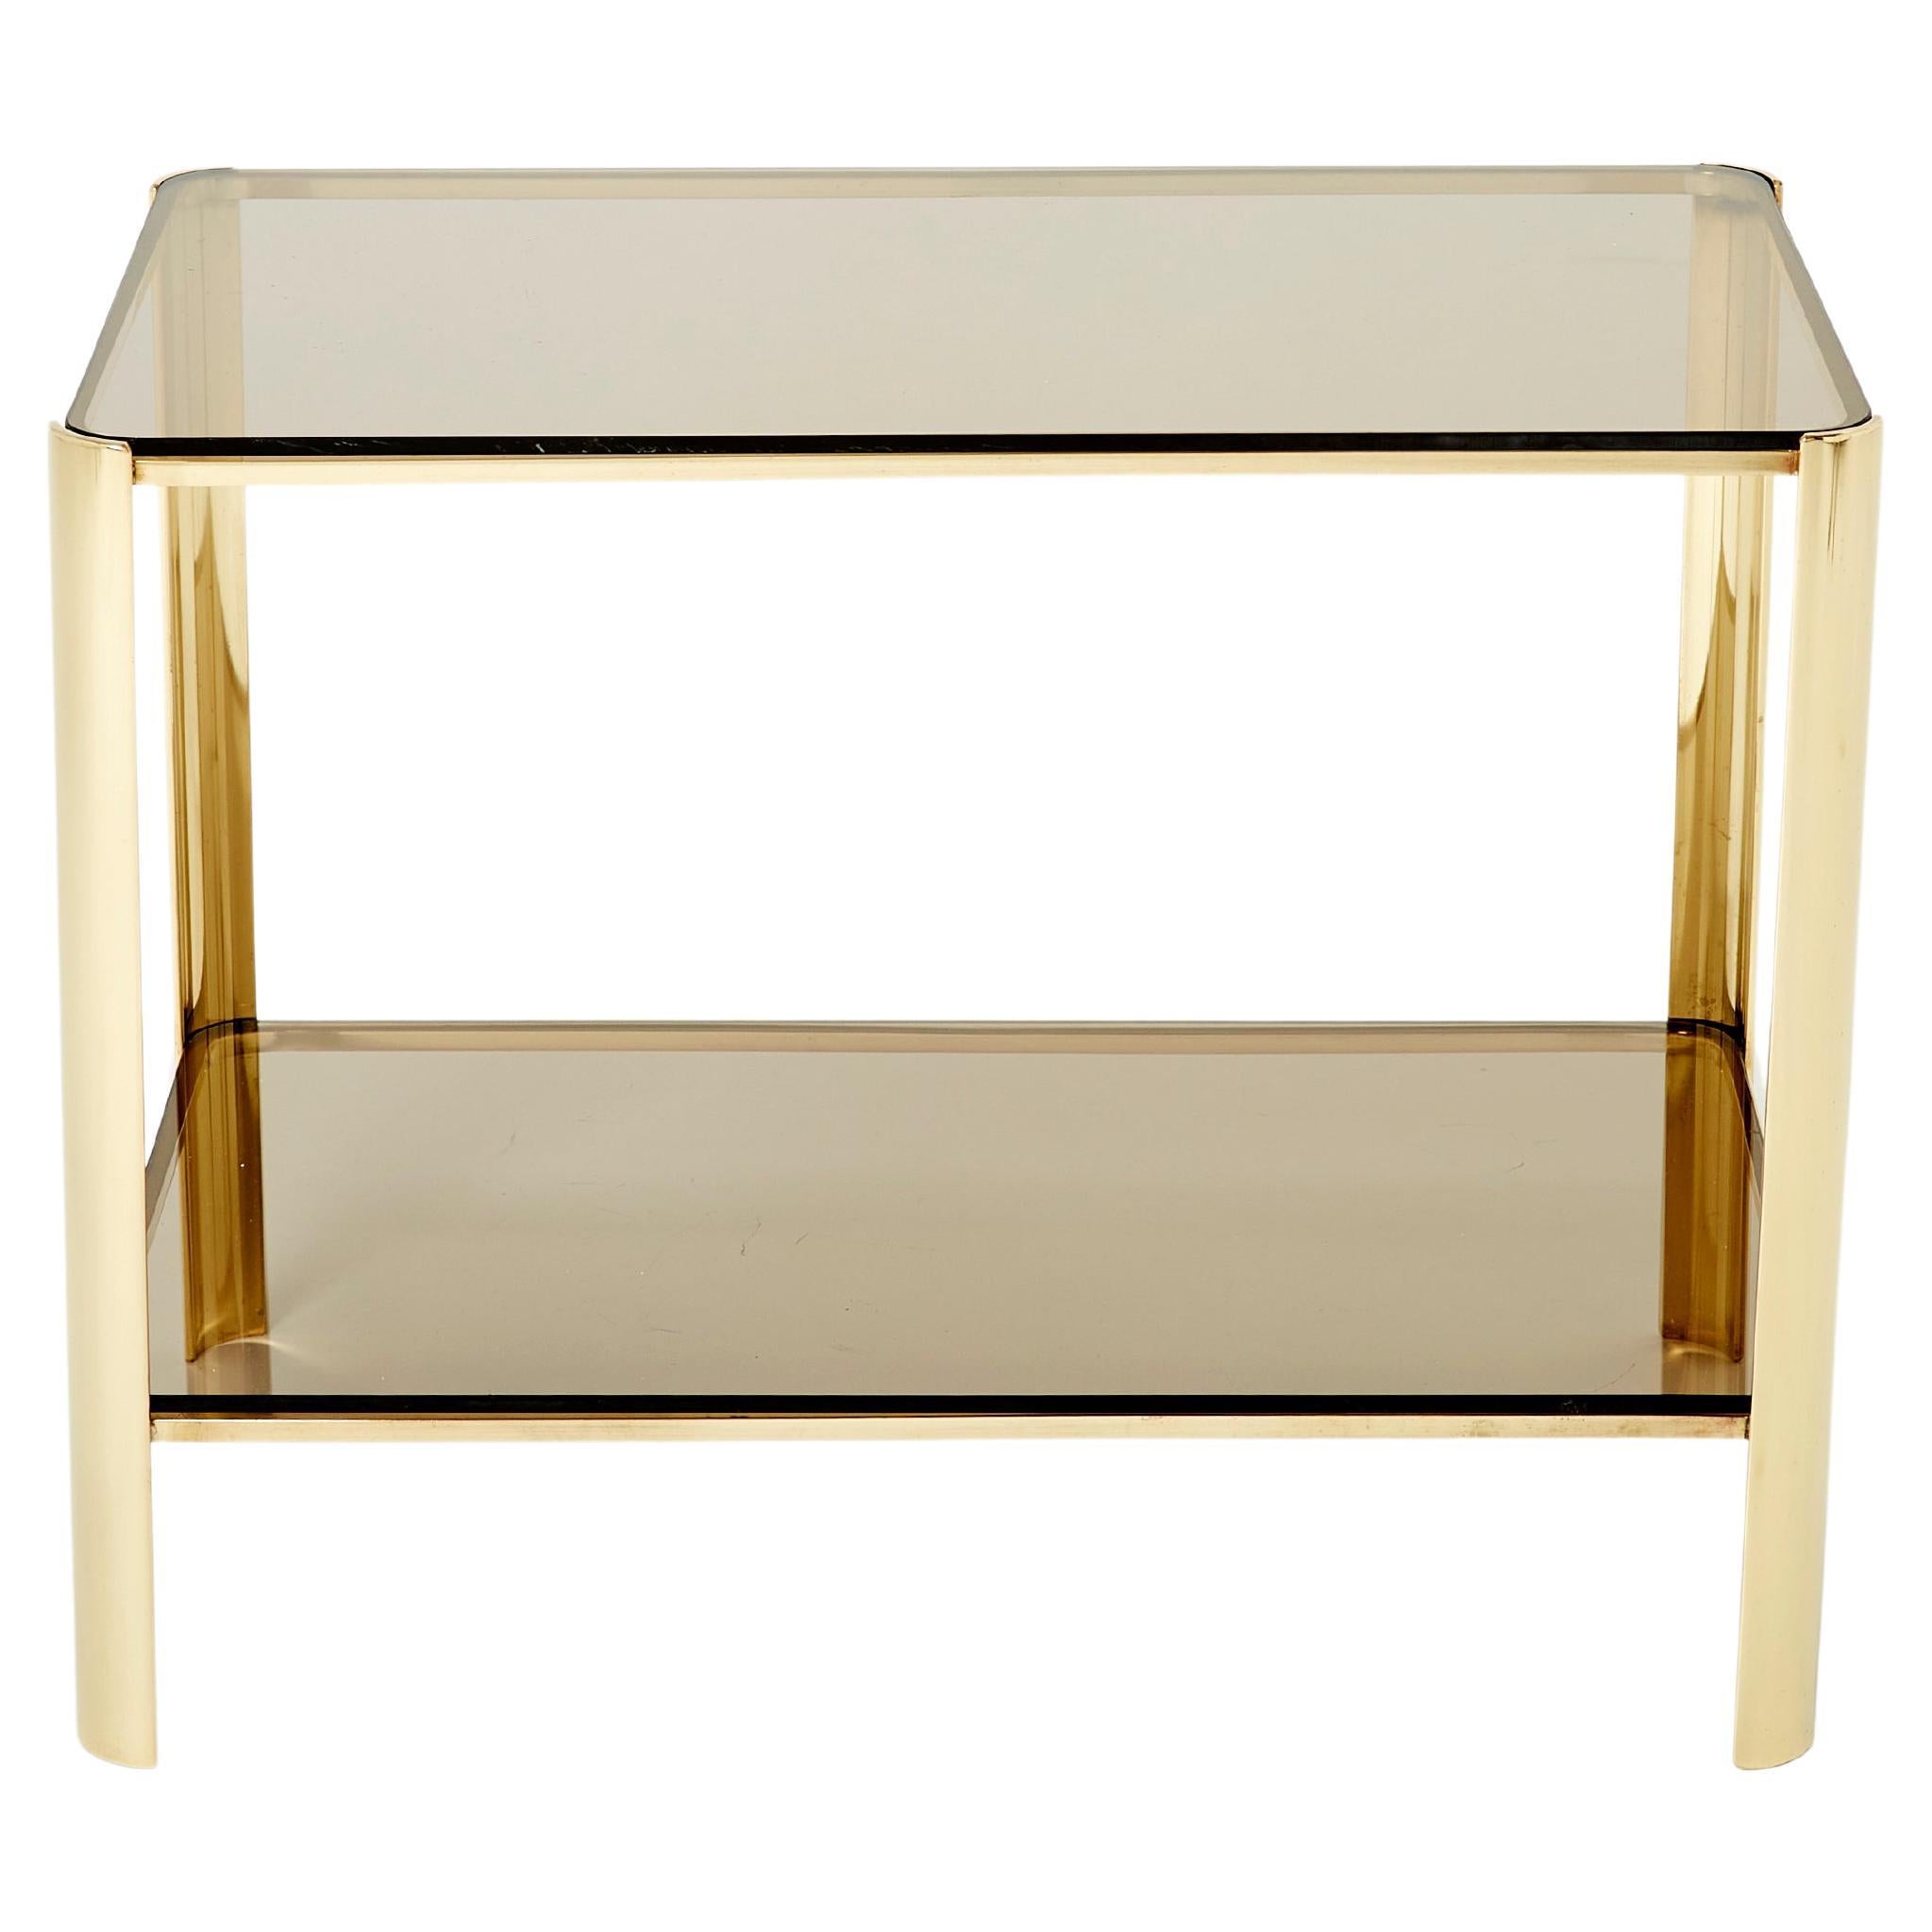 Two-Tier Bronze Side Table by Jacques Quinet for Broncz, 1960s For Sale